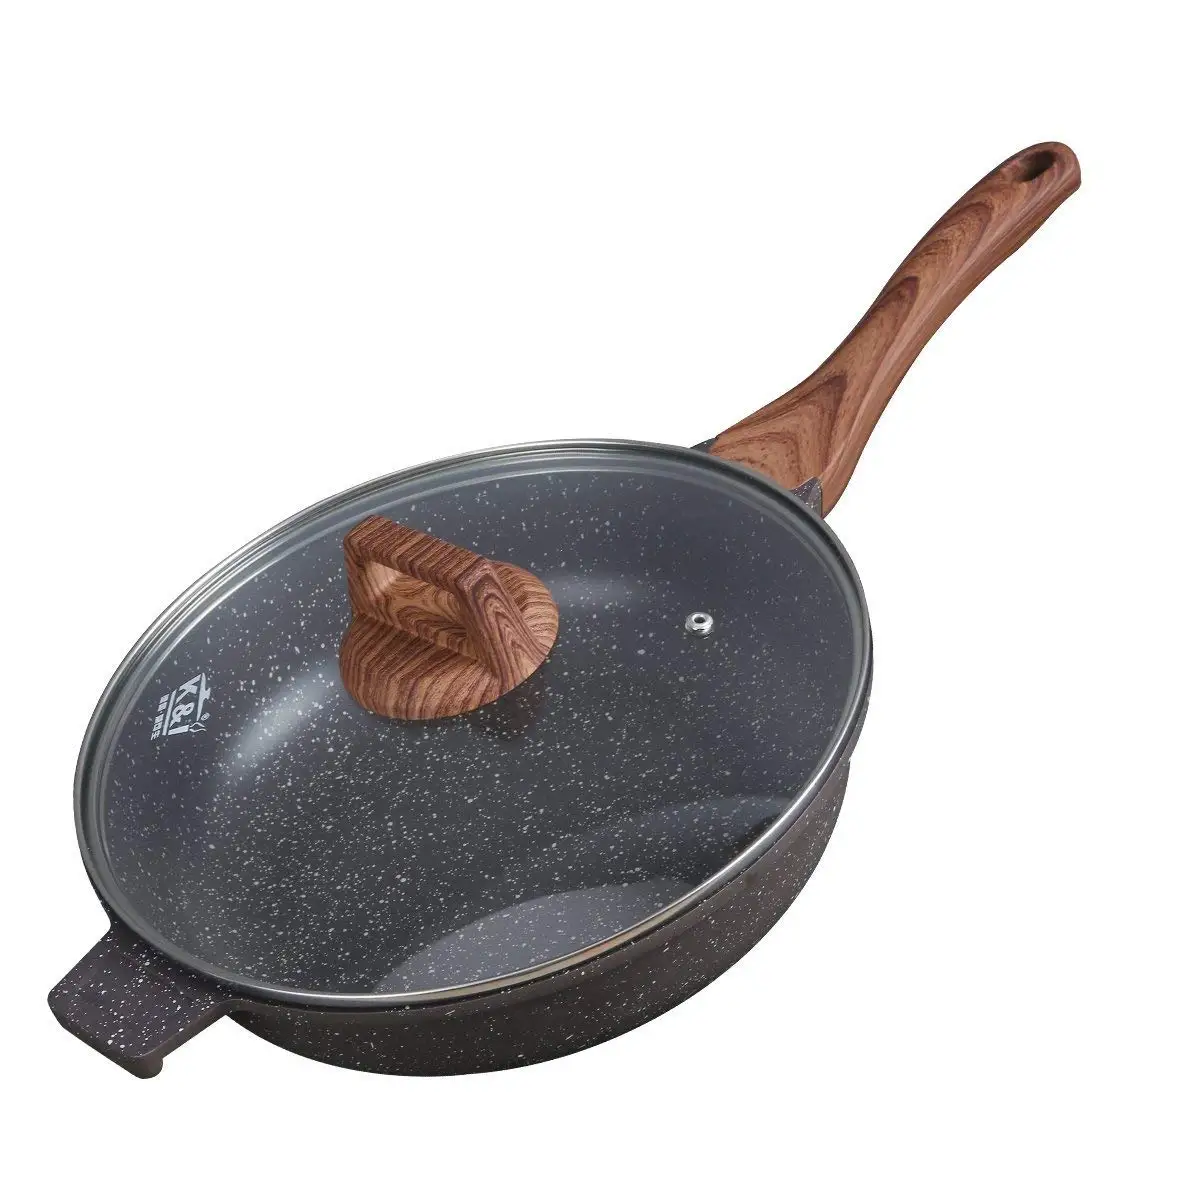 Nonstick pan Sacow 6 Non-stick Copper Frying Pan With Ceramic Coating And Induction Cooking Oven Safe